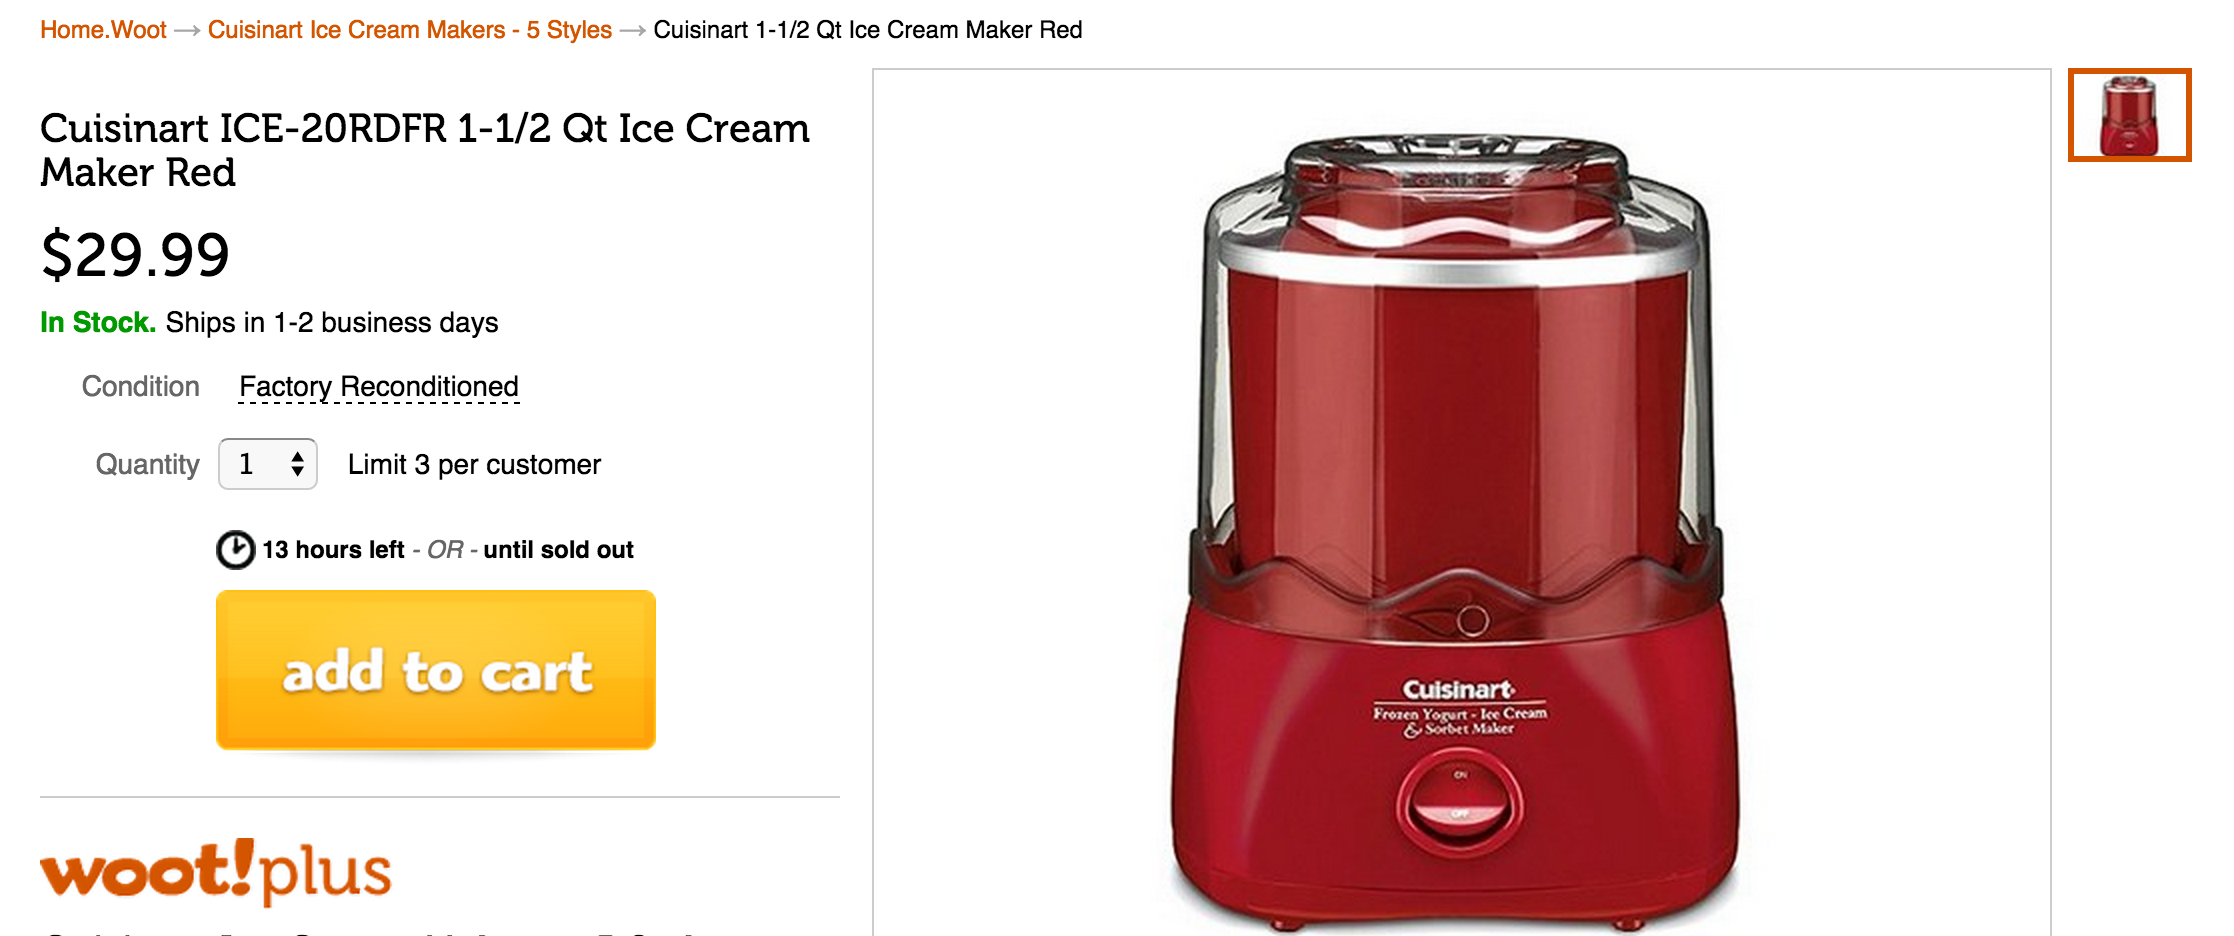 https://9to5toys.com/wp-content/uploads/sites/5/2015/05/cuisinart-automatic-1-12-quart-ice-cream-maker-in-red-ice-20-rd-sale-021.png